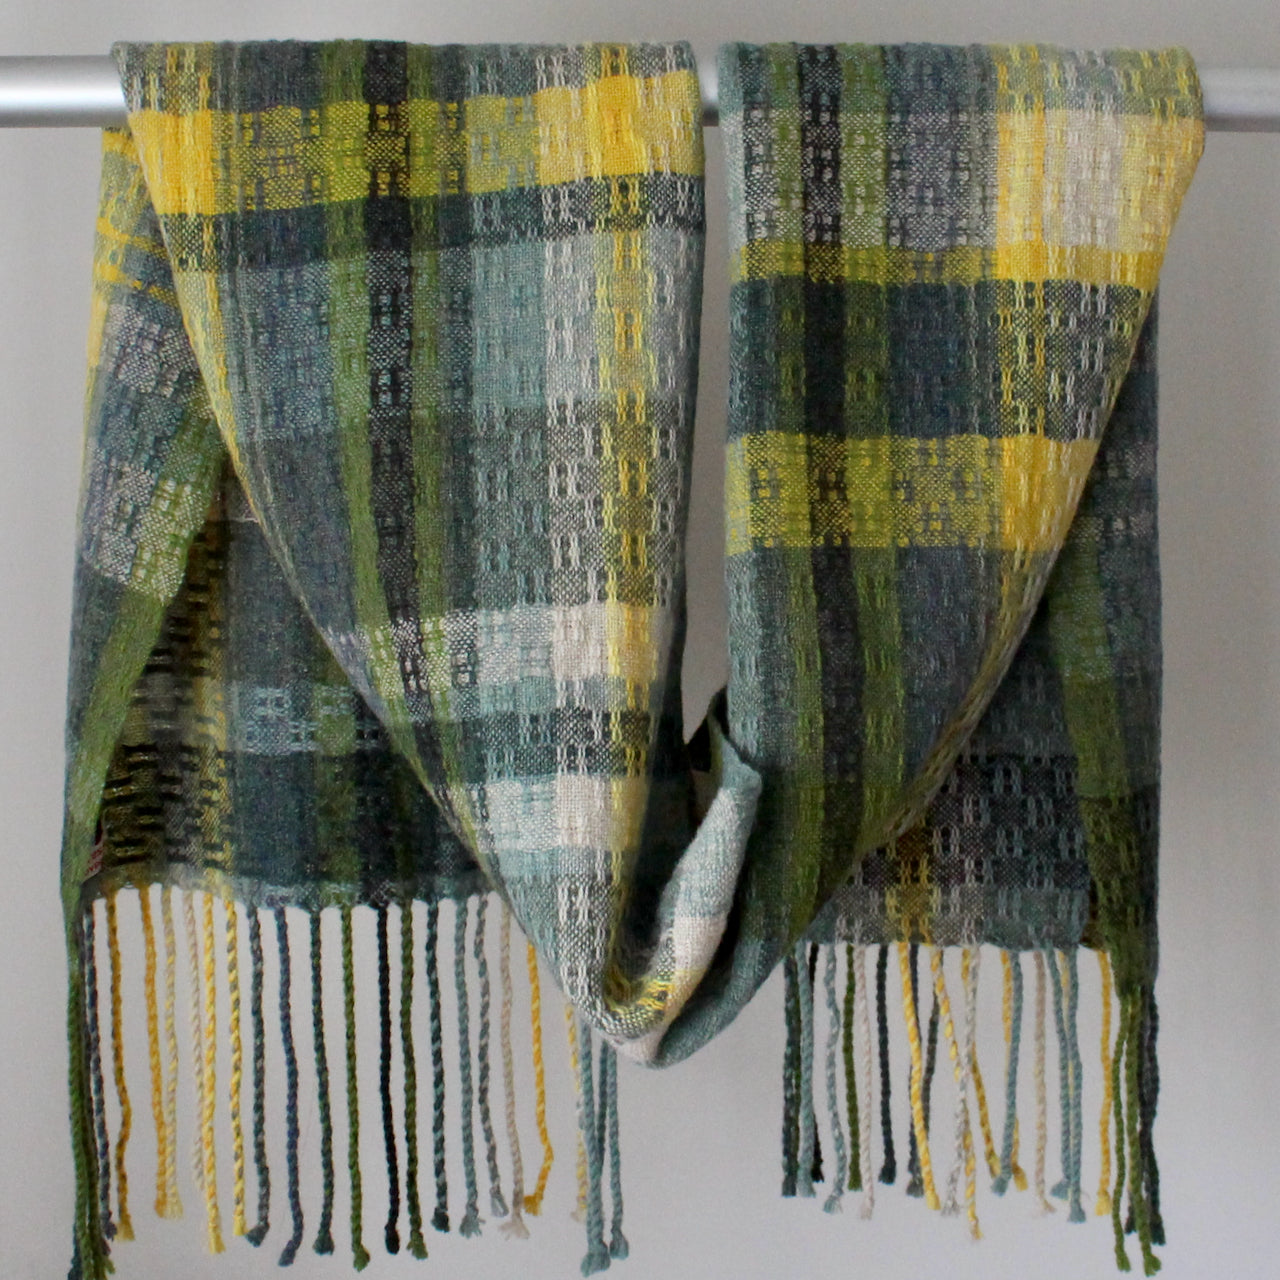 Cornish textile designer Teresa Dunne's hand-woven scarf in shades of blue, green and yellow